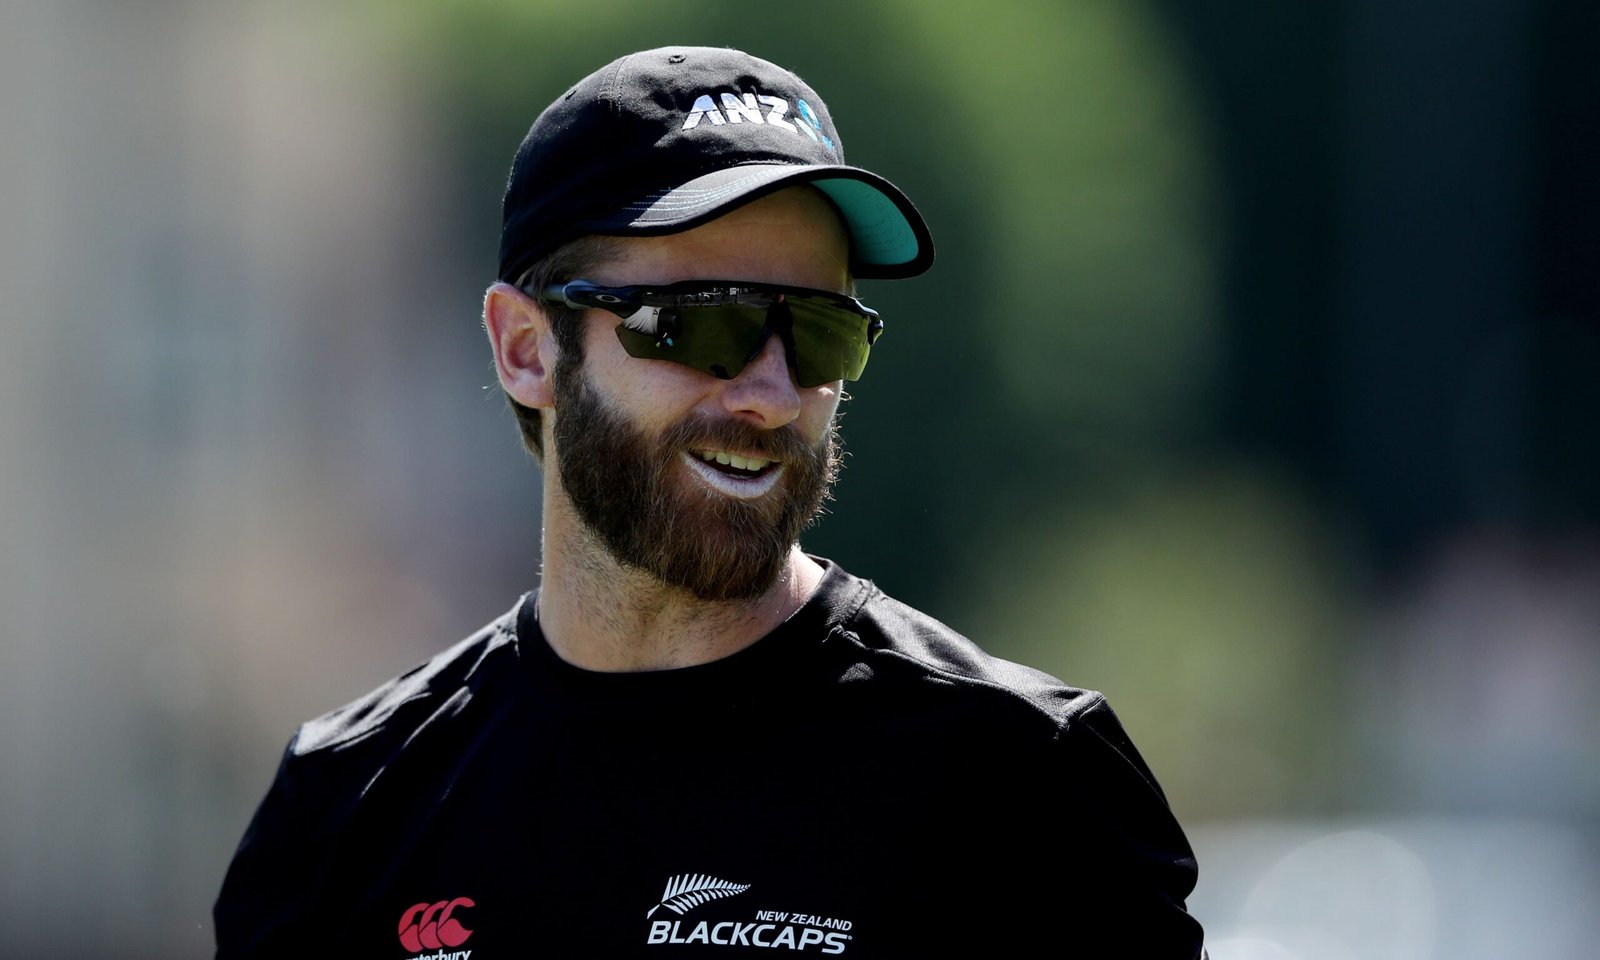 Kane Williamson shared a statement ahead of the game against Pakistan in T20 World Cup